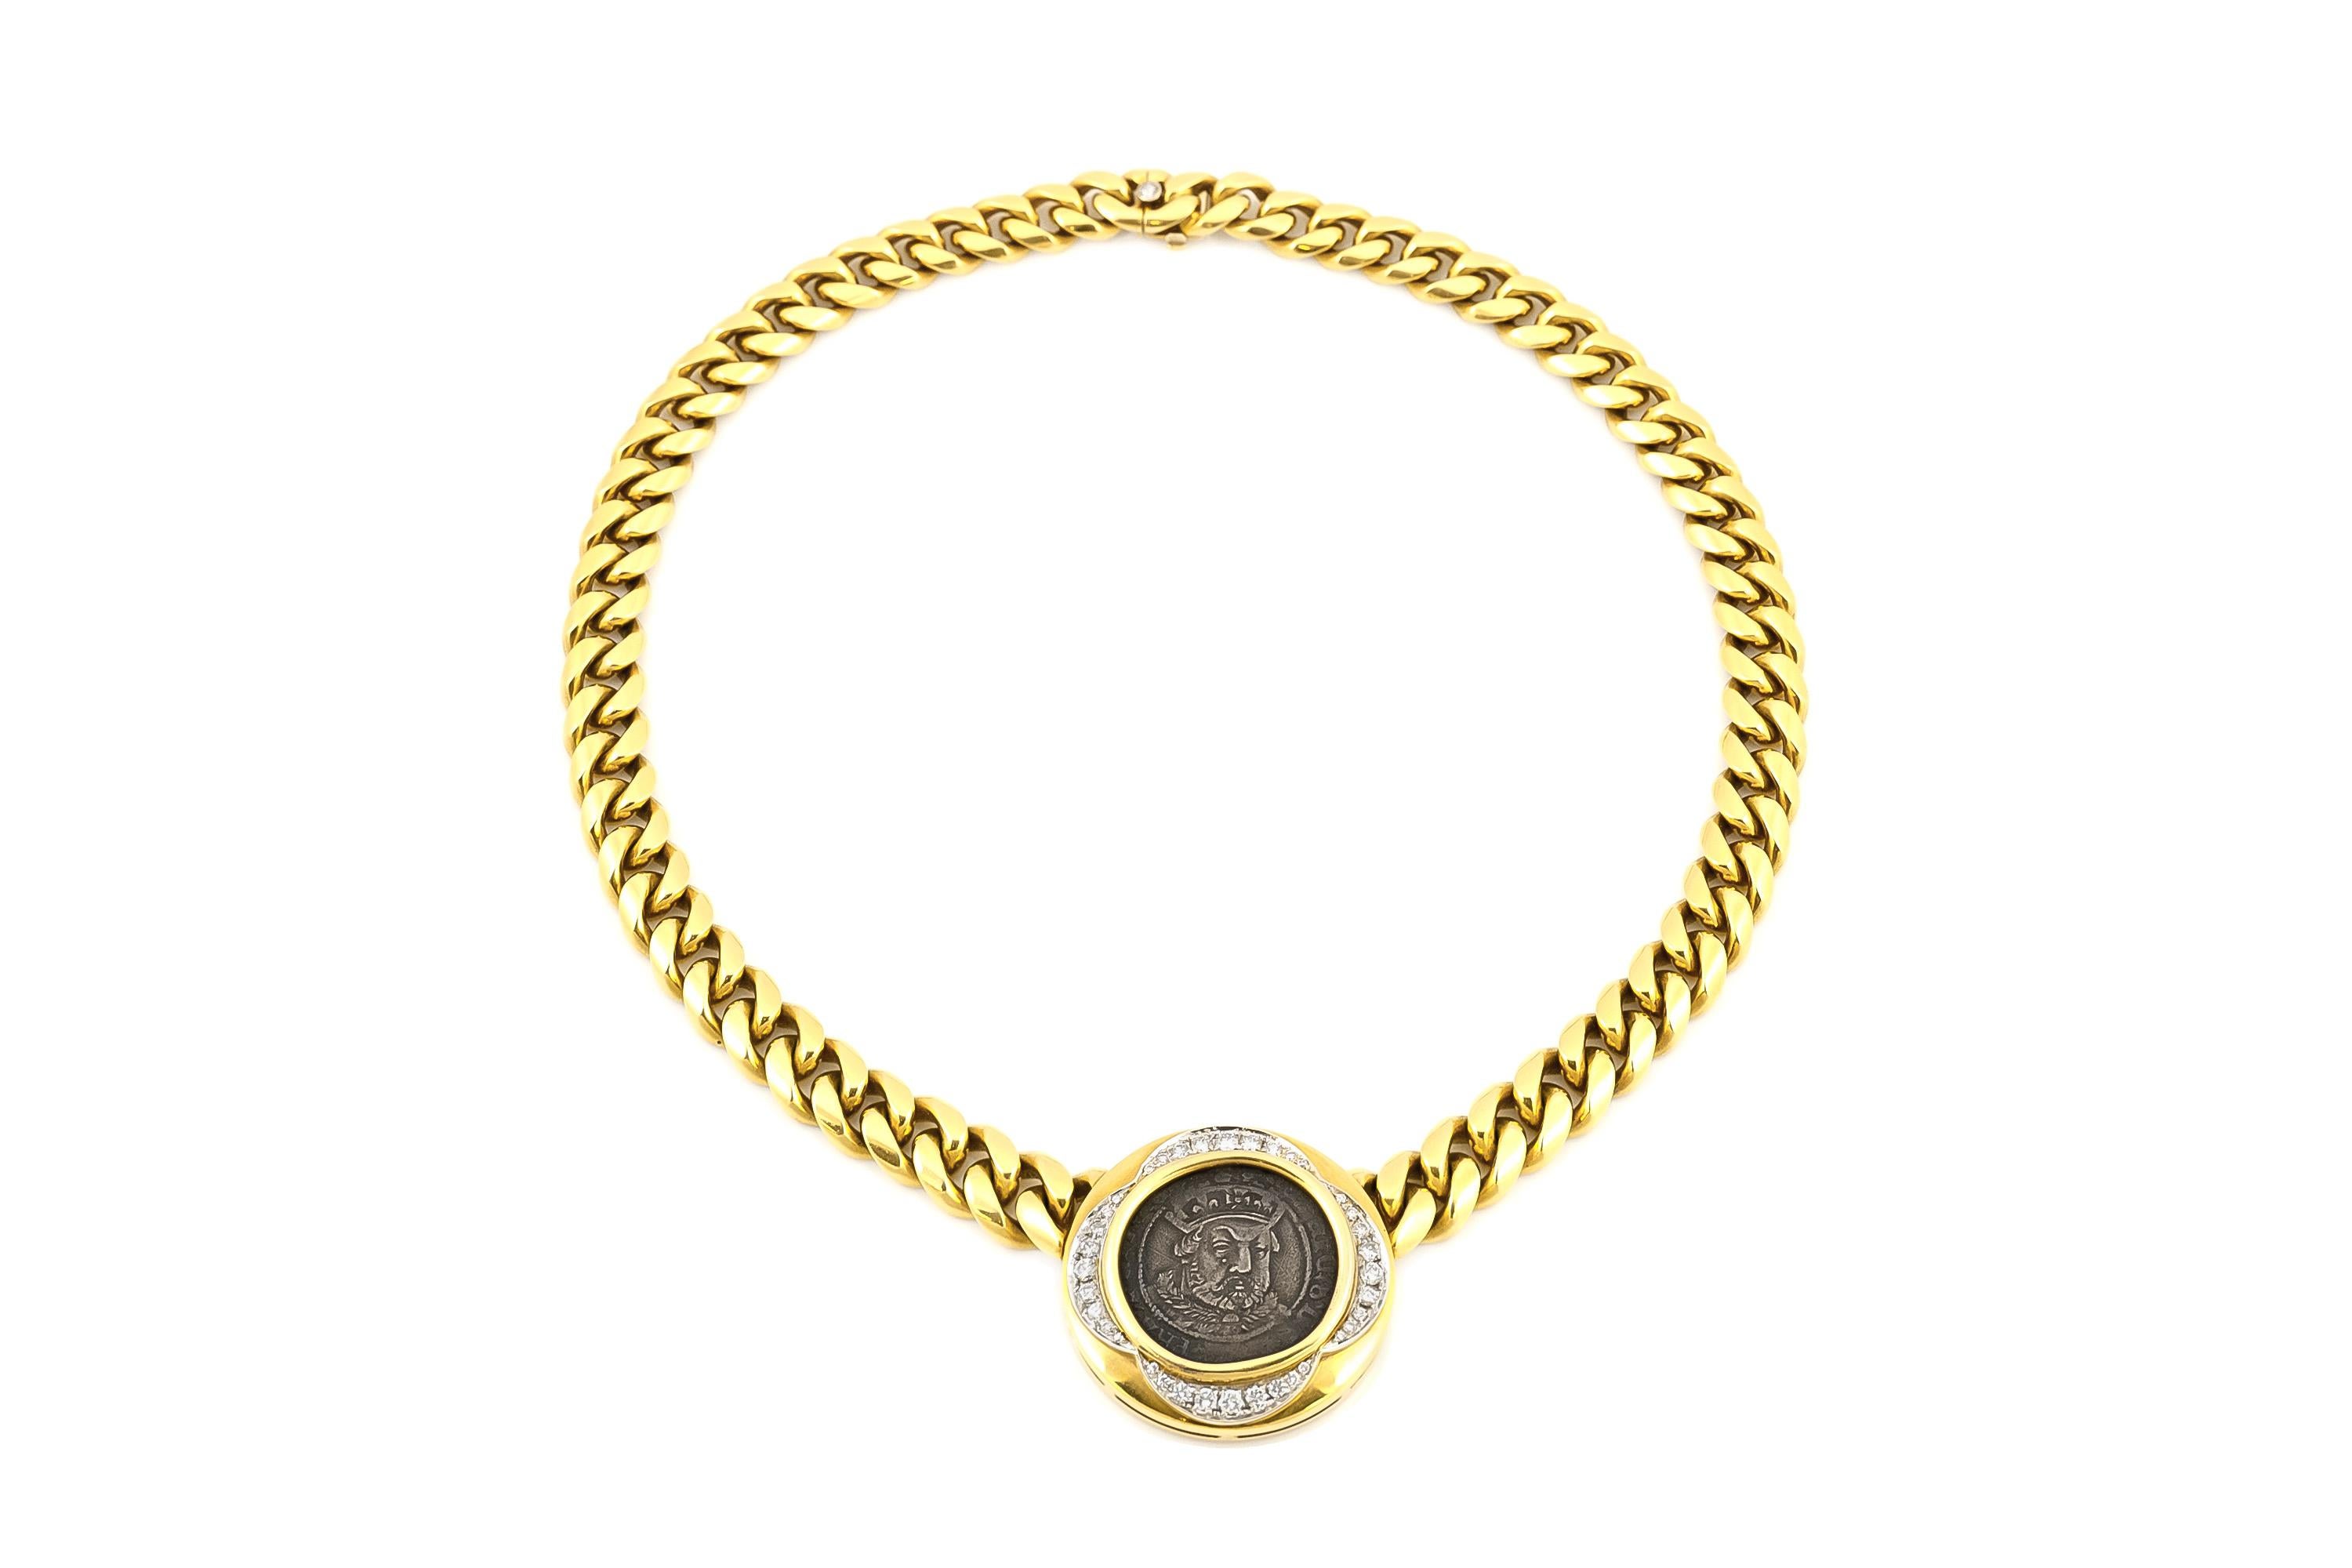 Finely crafted in 18k yellow gold with a Henry the 8th coin in the center, flanked by Round Brilliant cut Diamonds weighing approximately a total of 1.60 carats.
Signed by Bvlgari, from their Monete collection
Made in Italy
15 1/4 inches